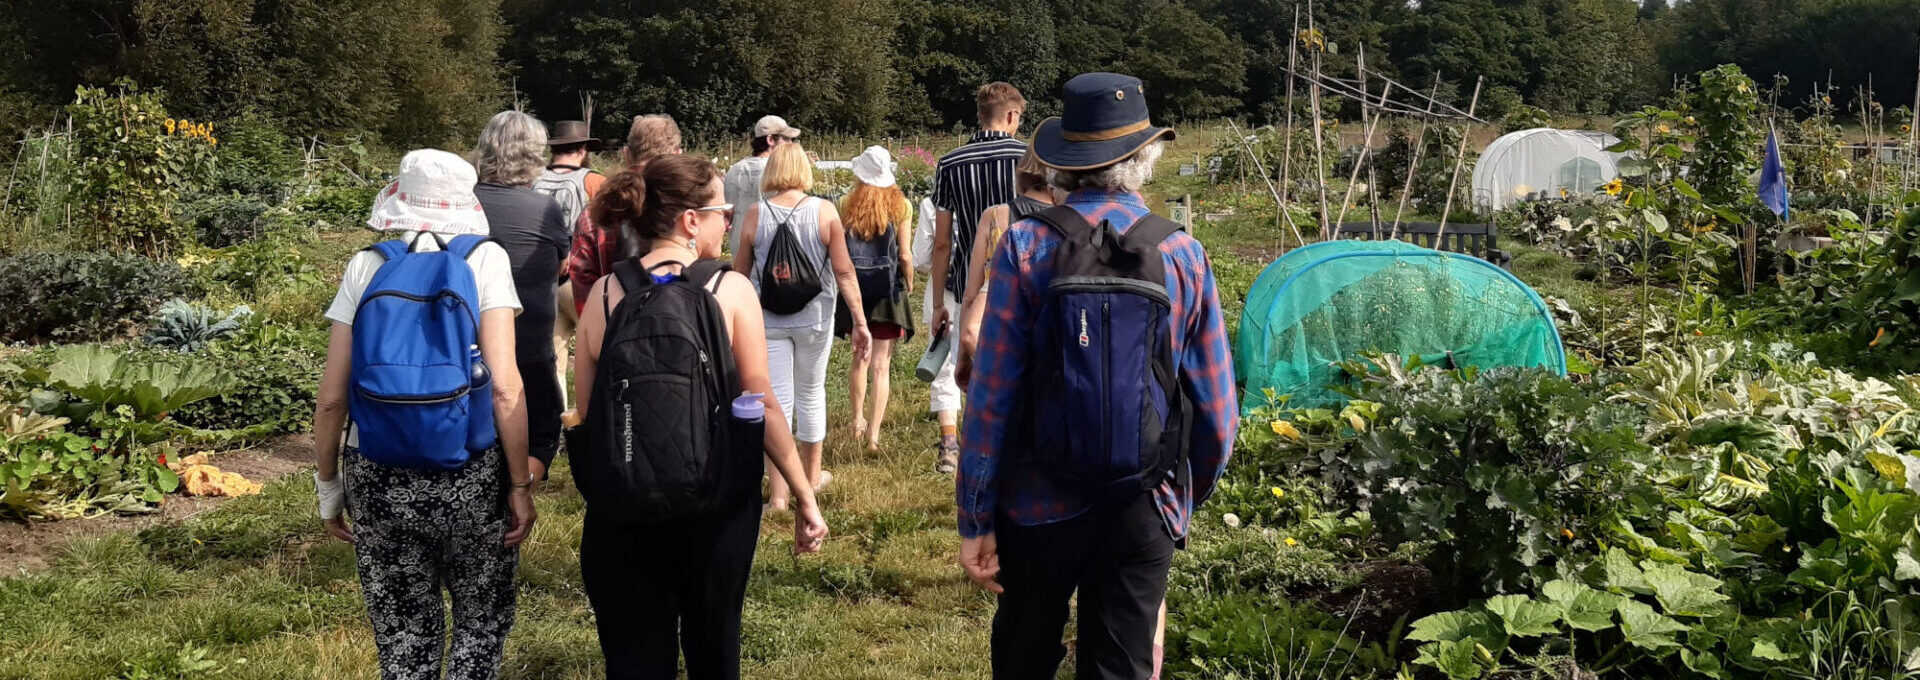 People walking into a community allotment